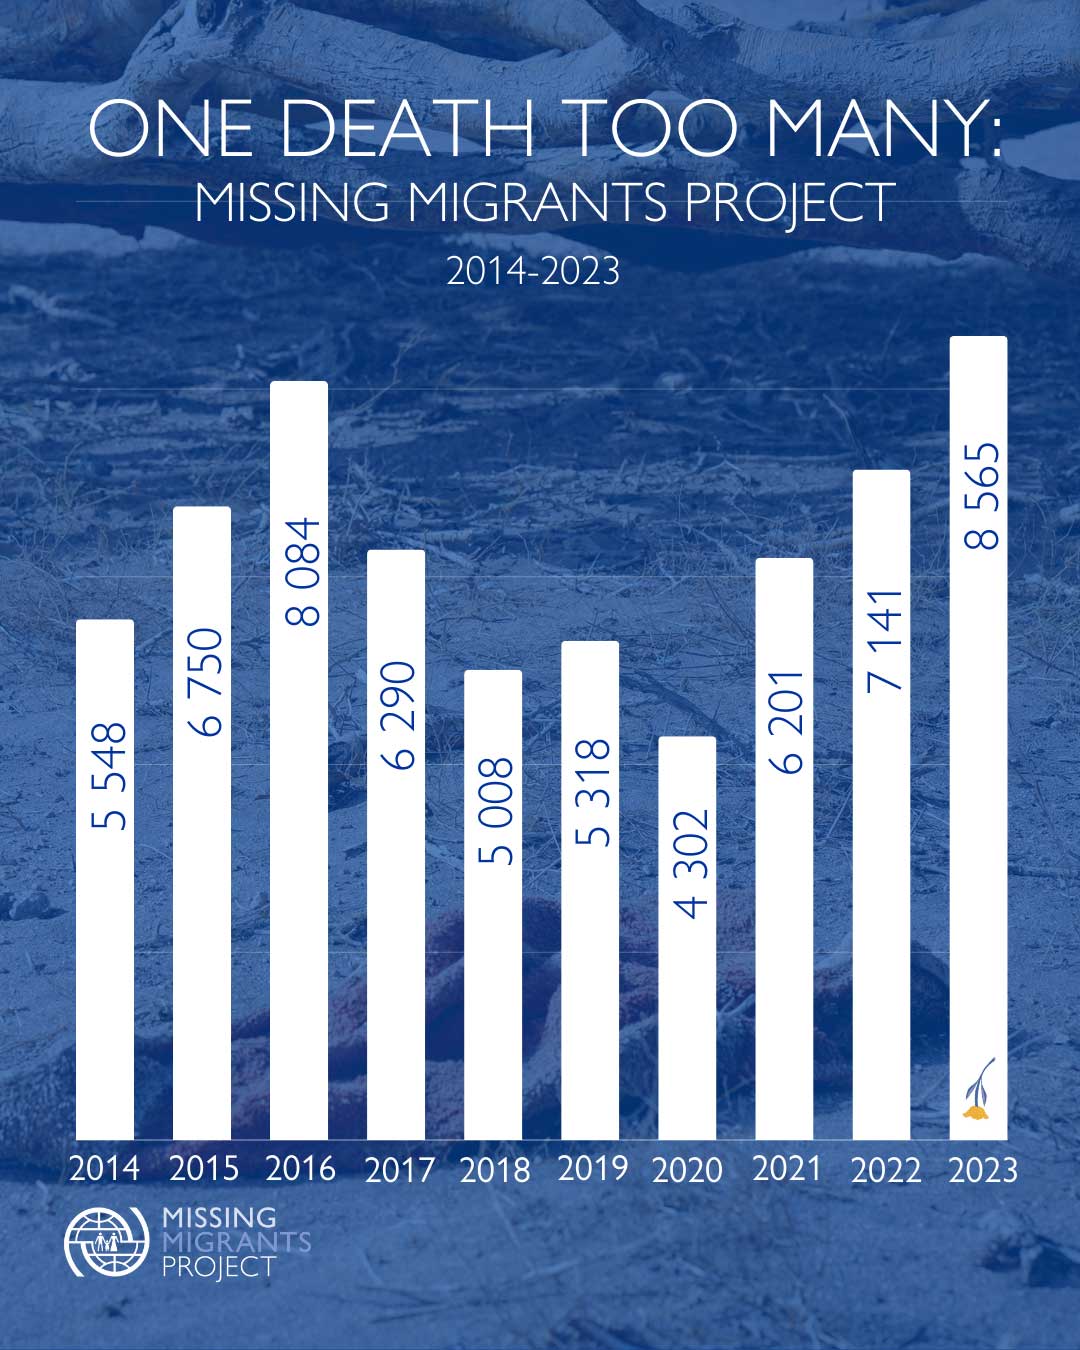 Data on migrant deaths 2014-2023